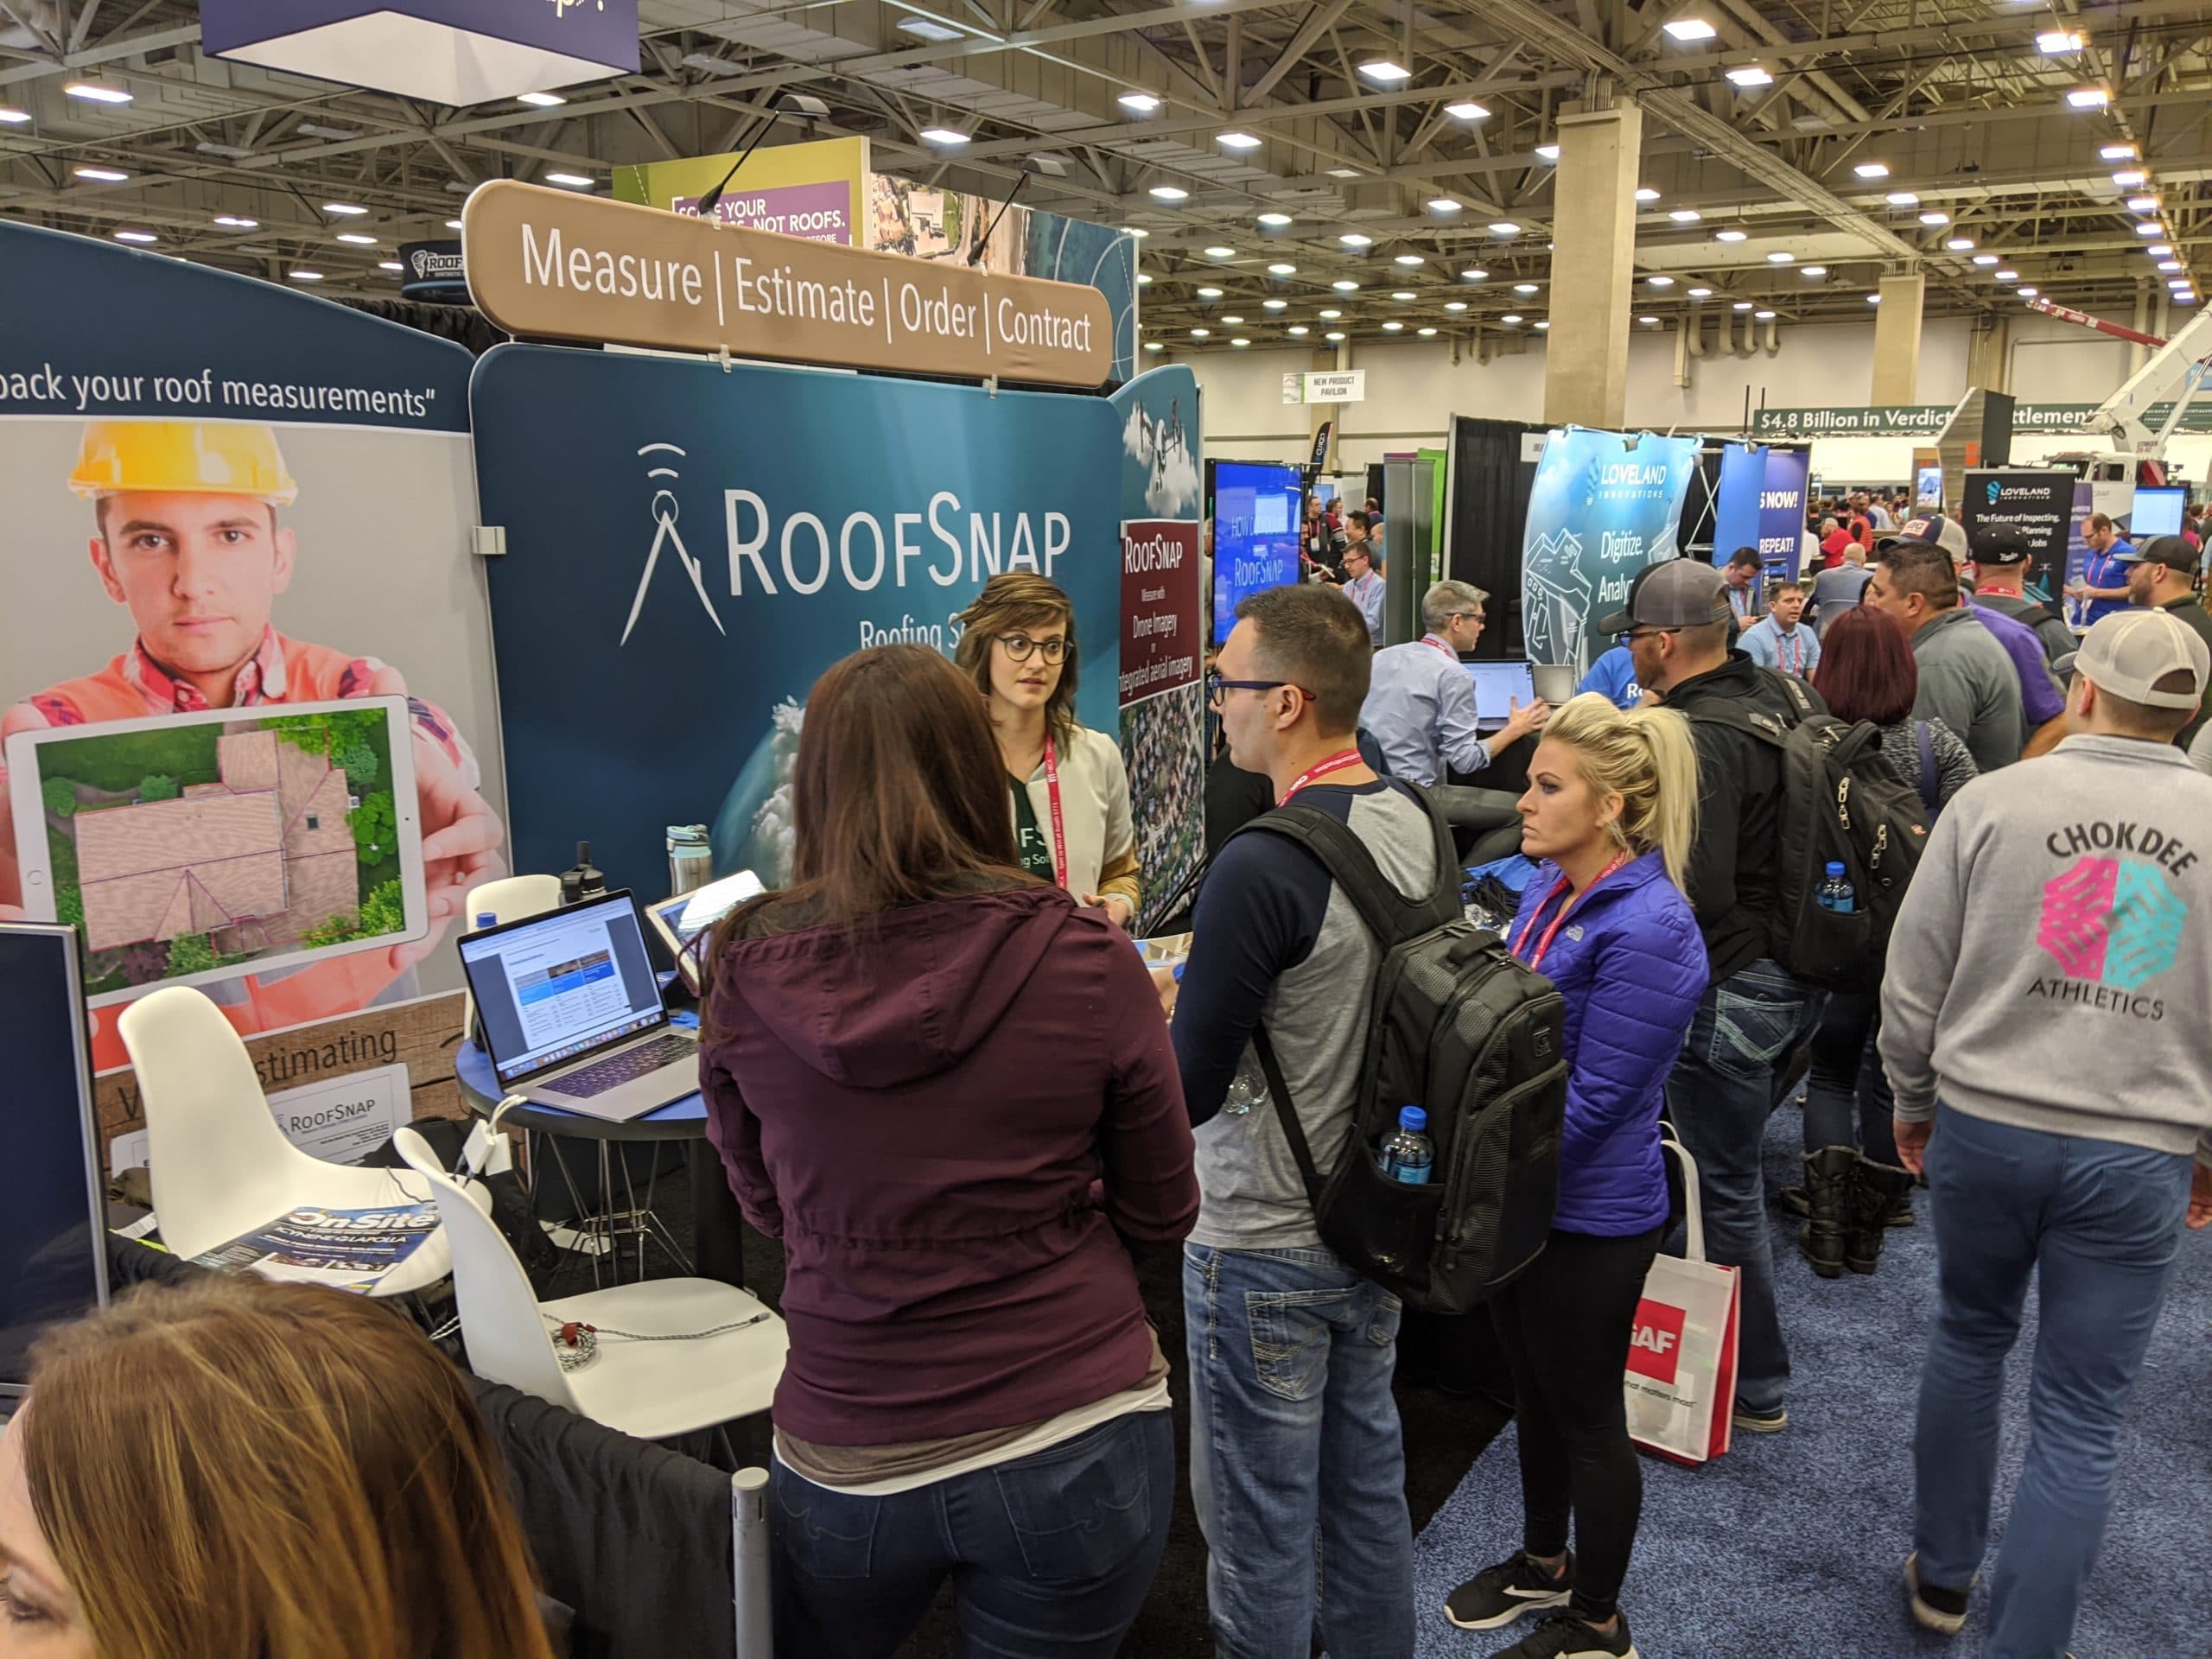 The RoofSnap booth was the place to be at the IRE